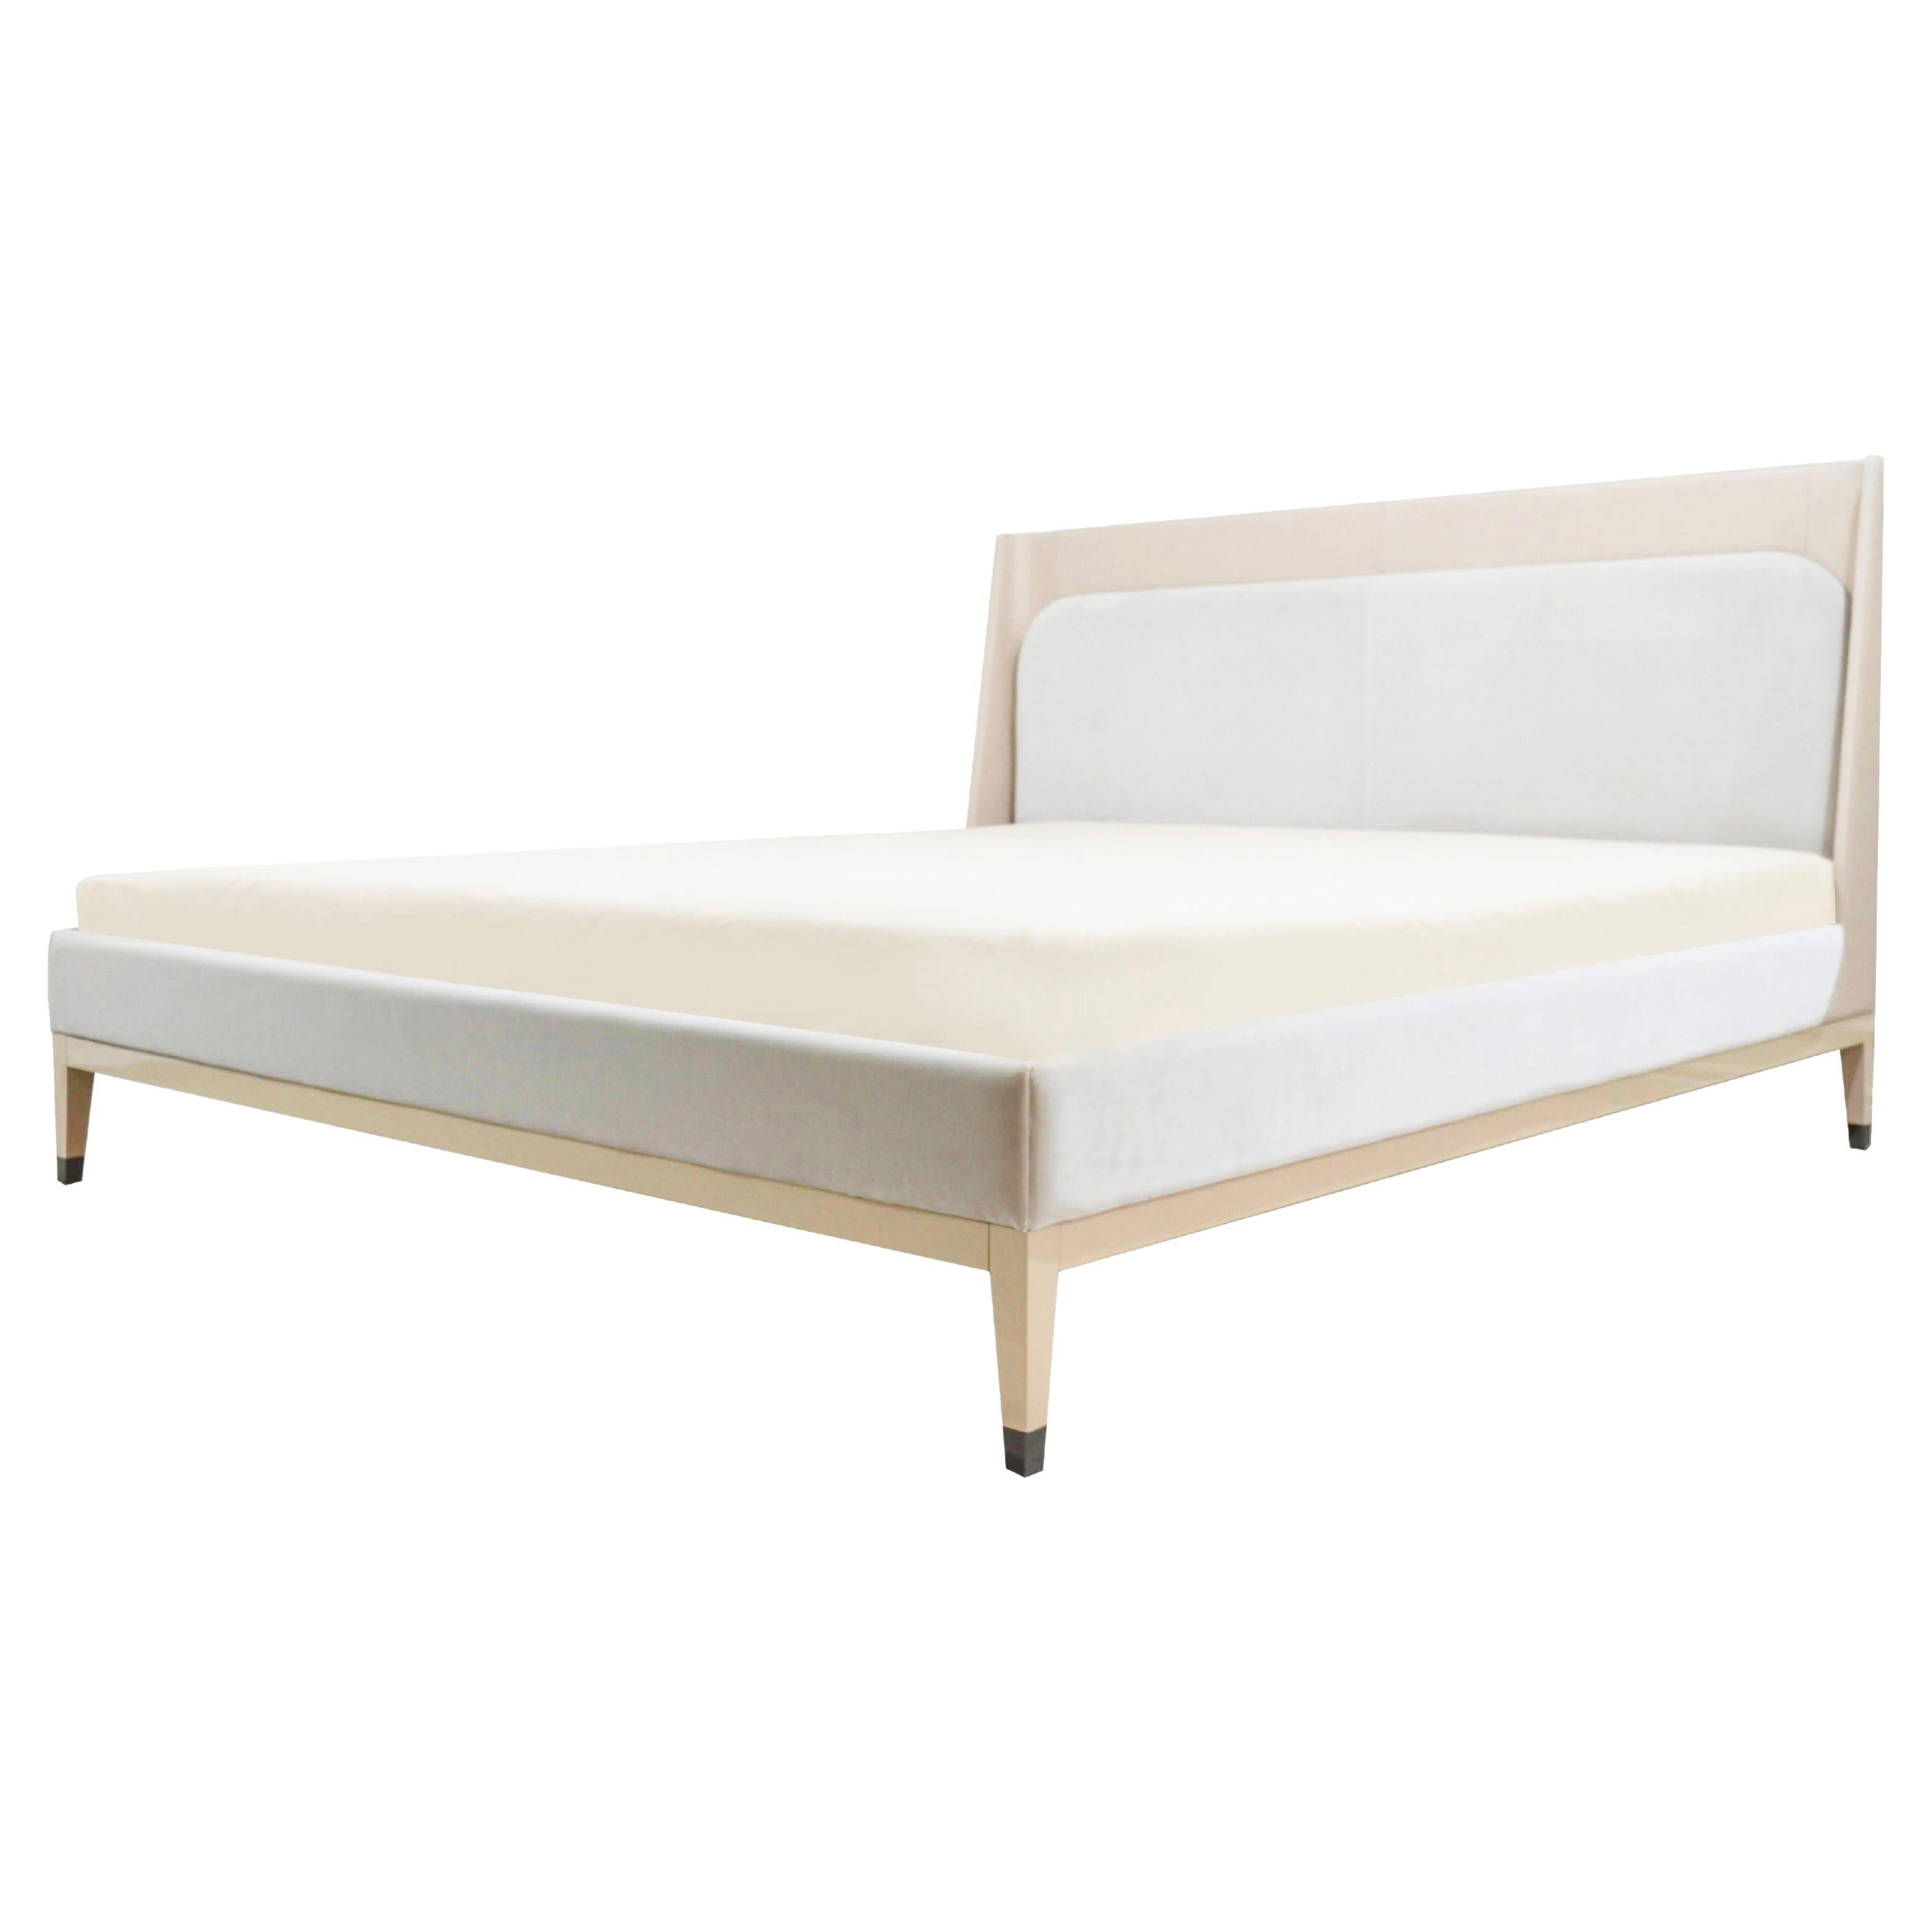 Bed, upholstered, beech wood frame. It is proposed covered in nubuck leather and cotton velvet, but it is customizable. The legs are in laquered Cappucino high-gloss.
Price for a 180 x 200cm mattress size frame.